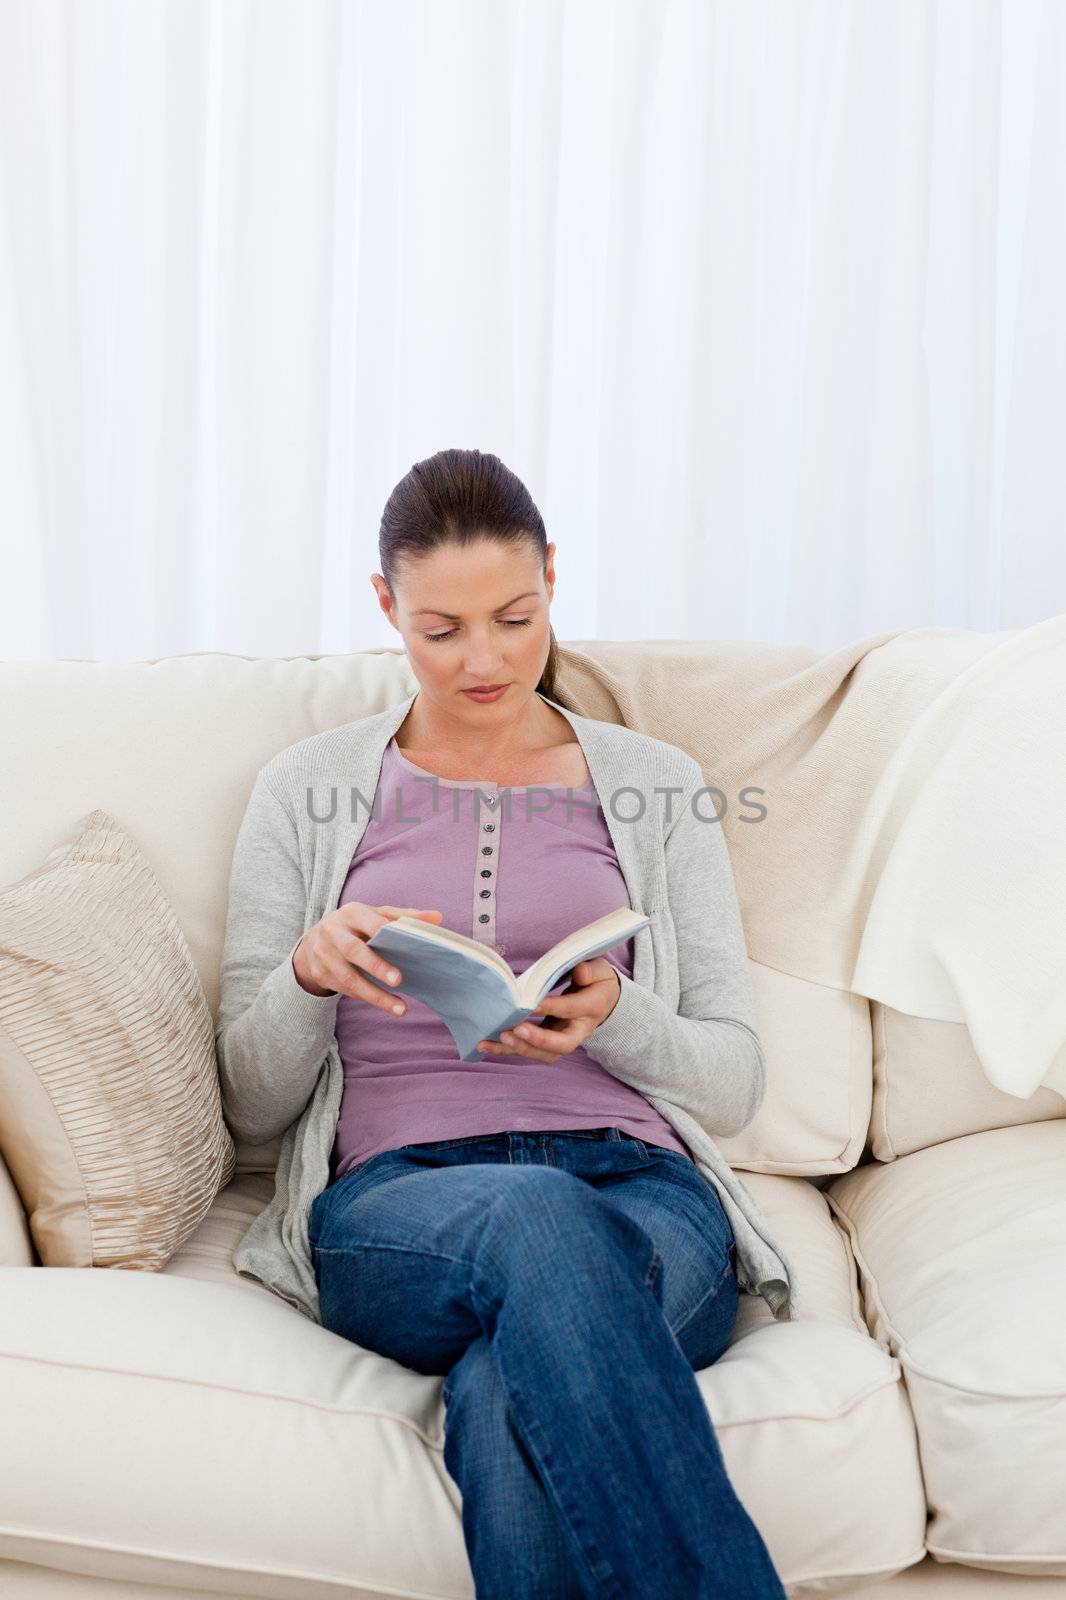 Attentive woman reading a book on the sofa of her living room